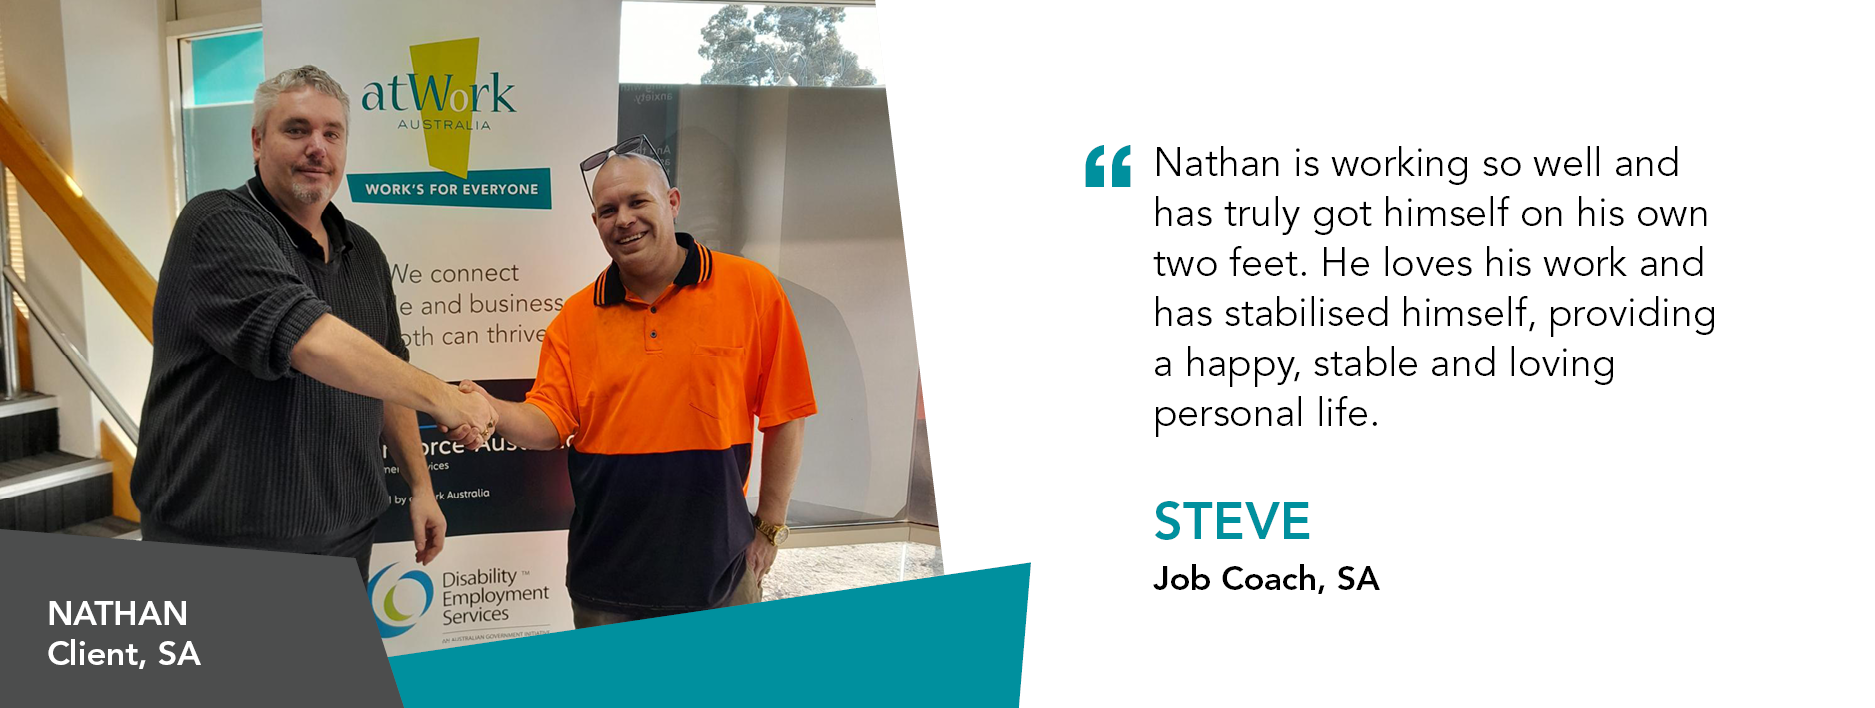 Quote reads "Nathan is working so well and has truly got himself on his own two feet. He loves his work and has stabilised himself, providing a happy, stable and loving personal life." said Steve Job Coach, South Australia